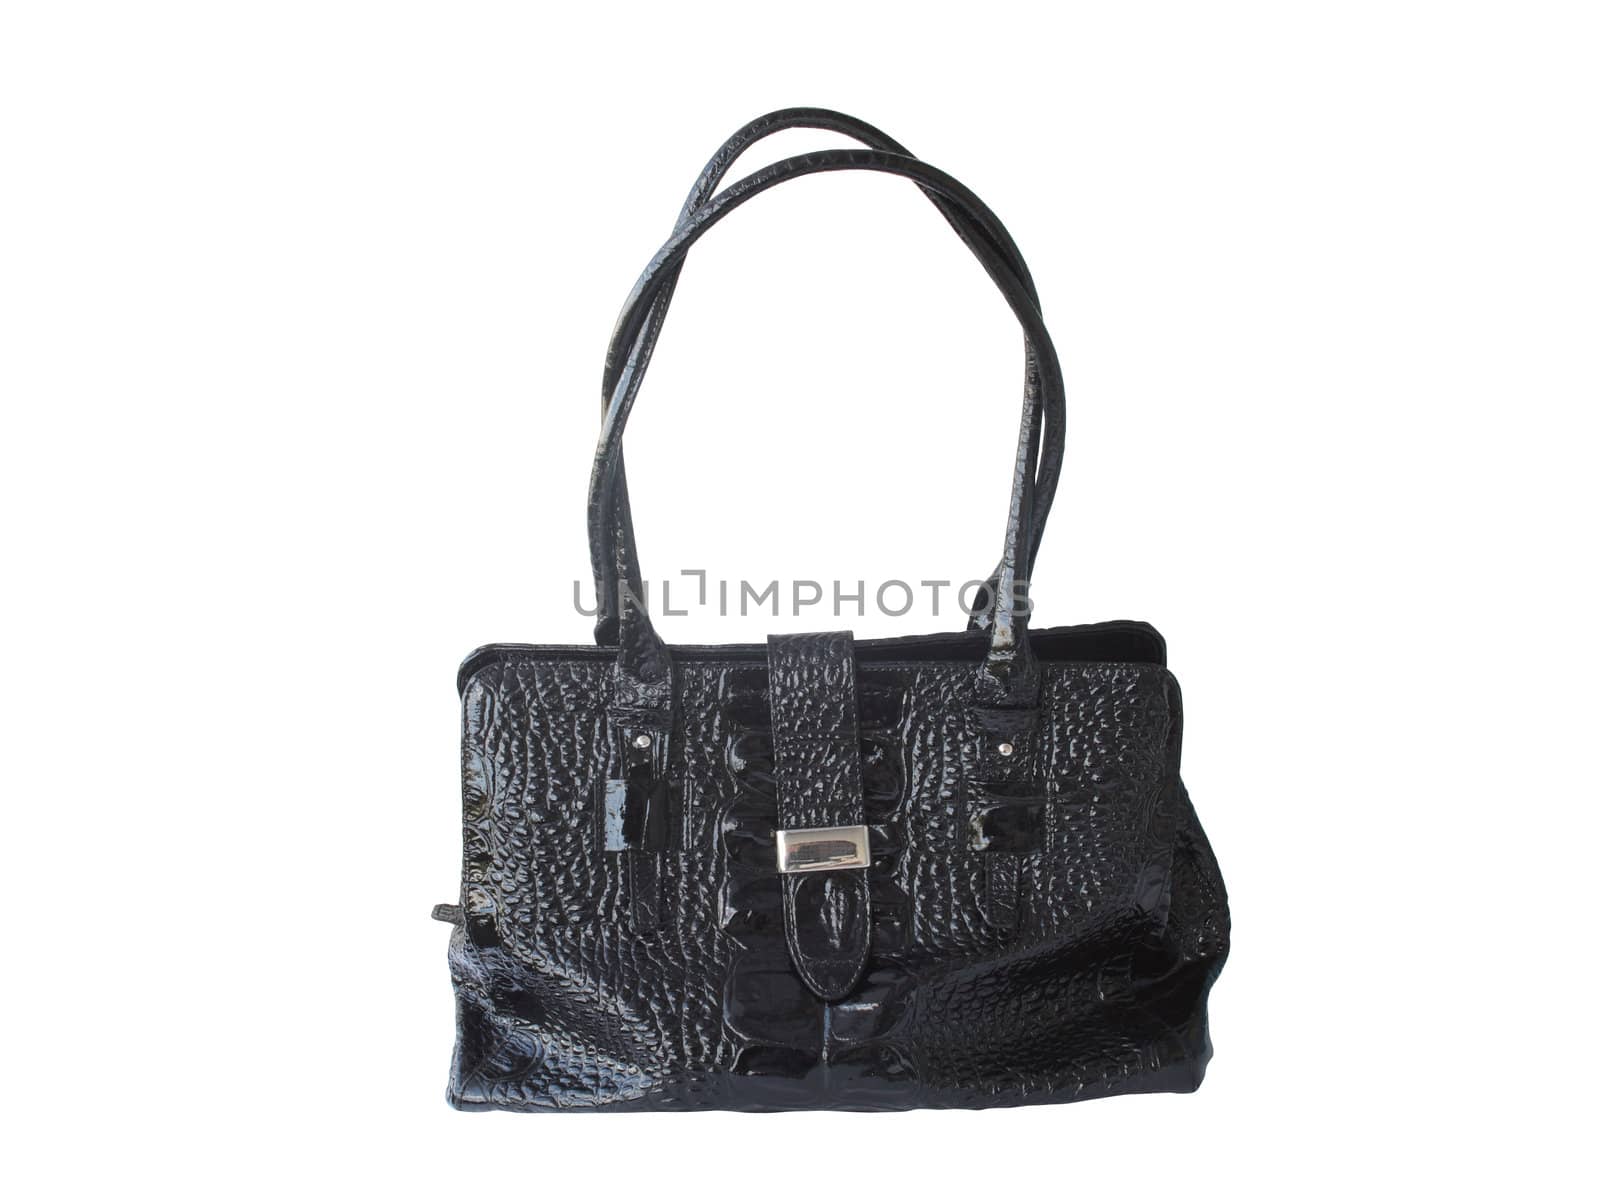 Nice black leather woman's city bag isolated on white background with clipping path